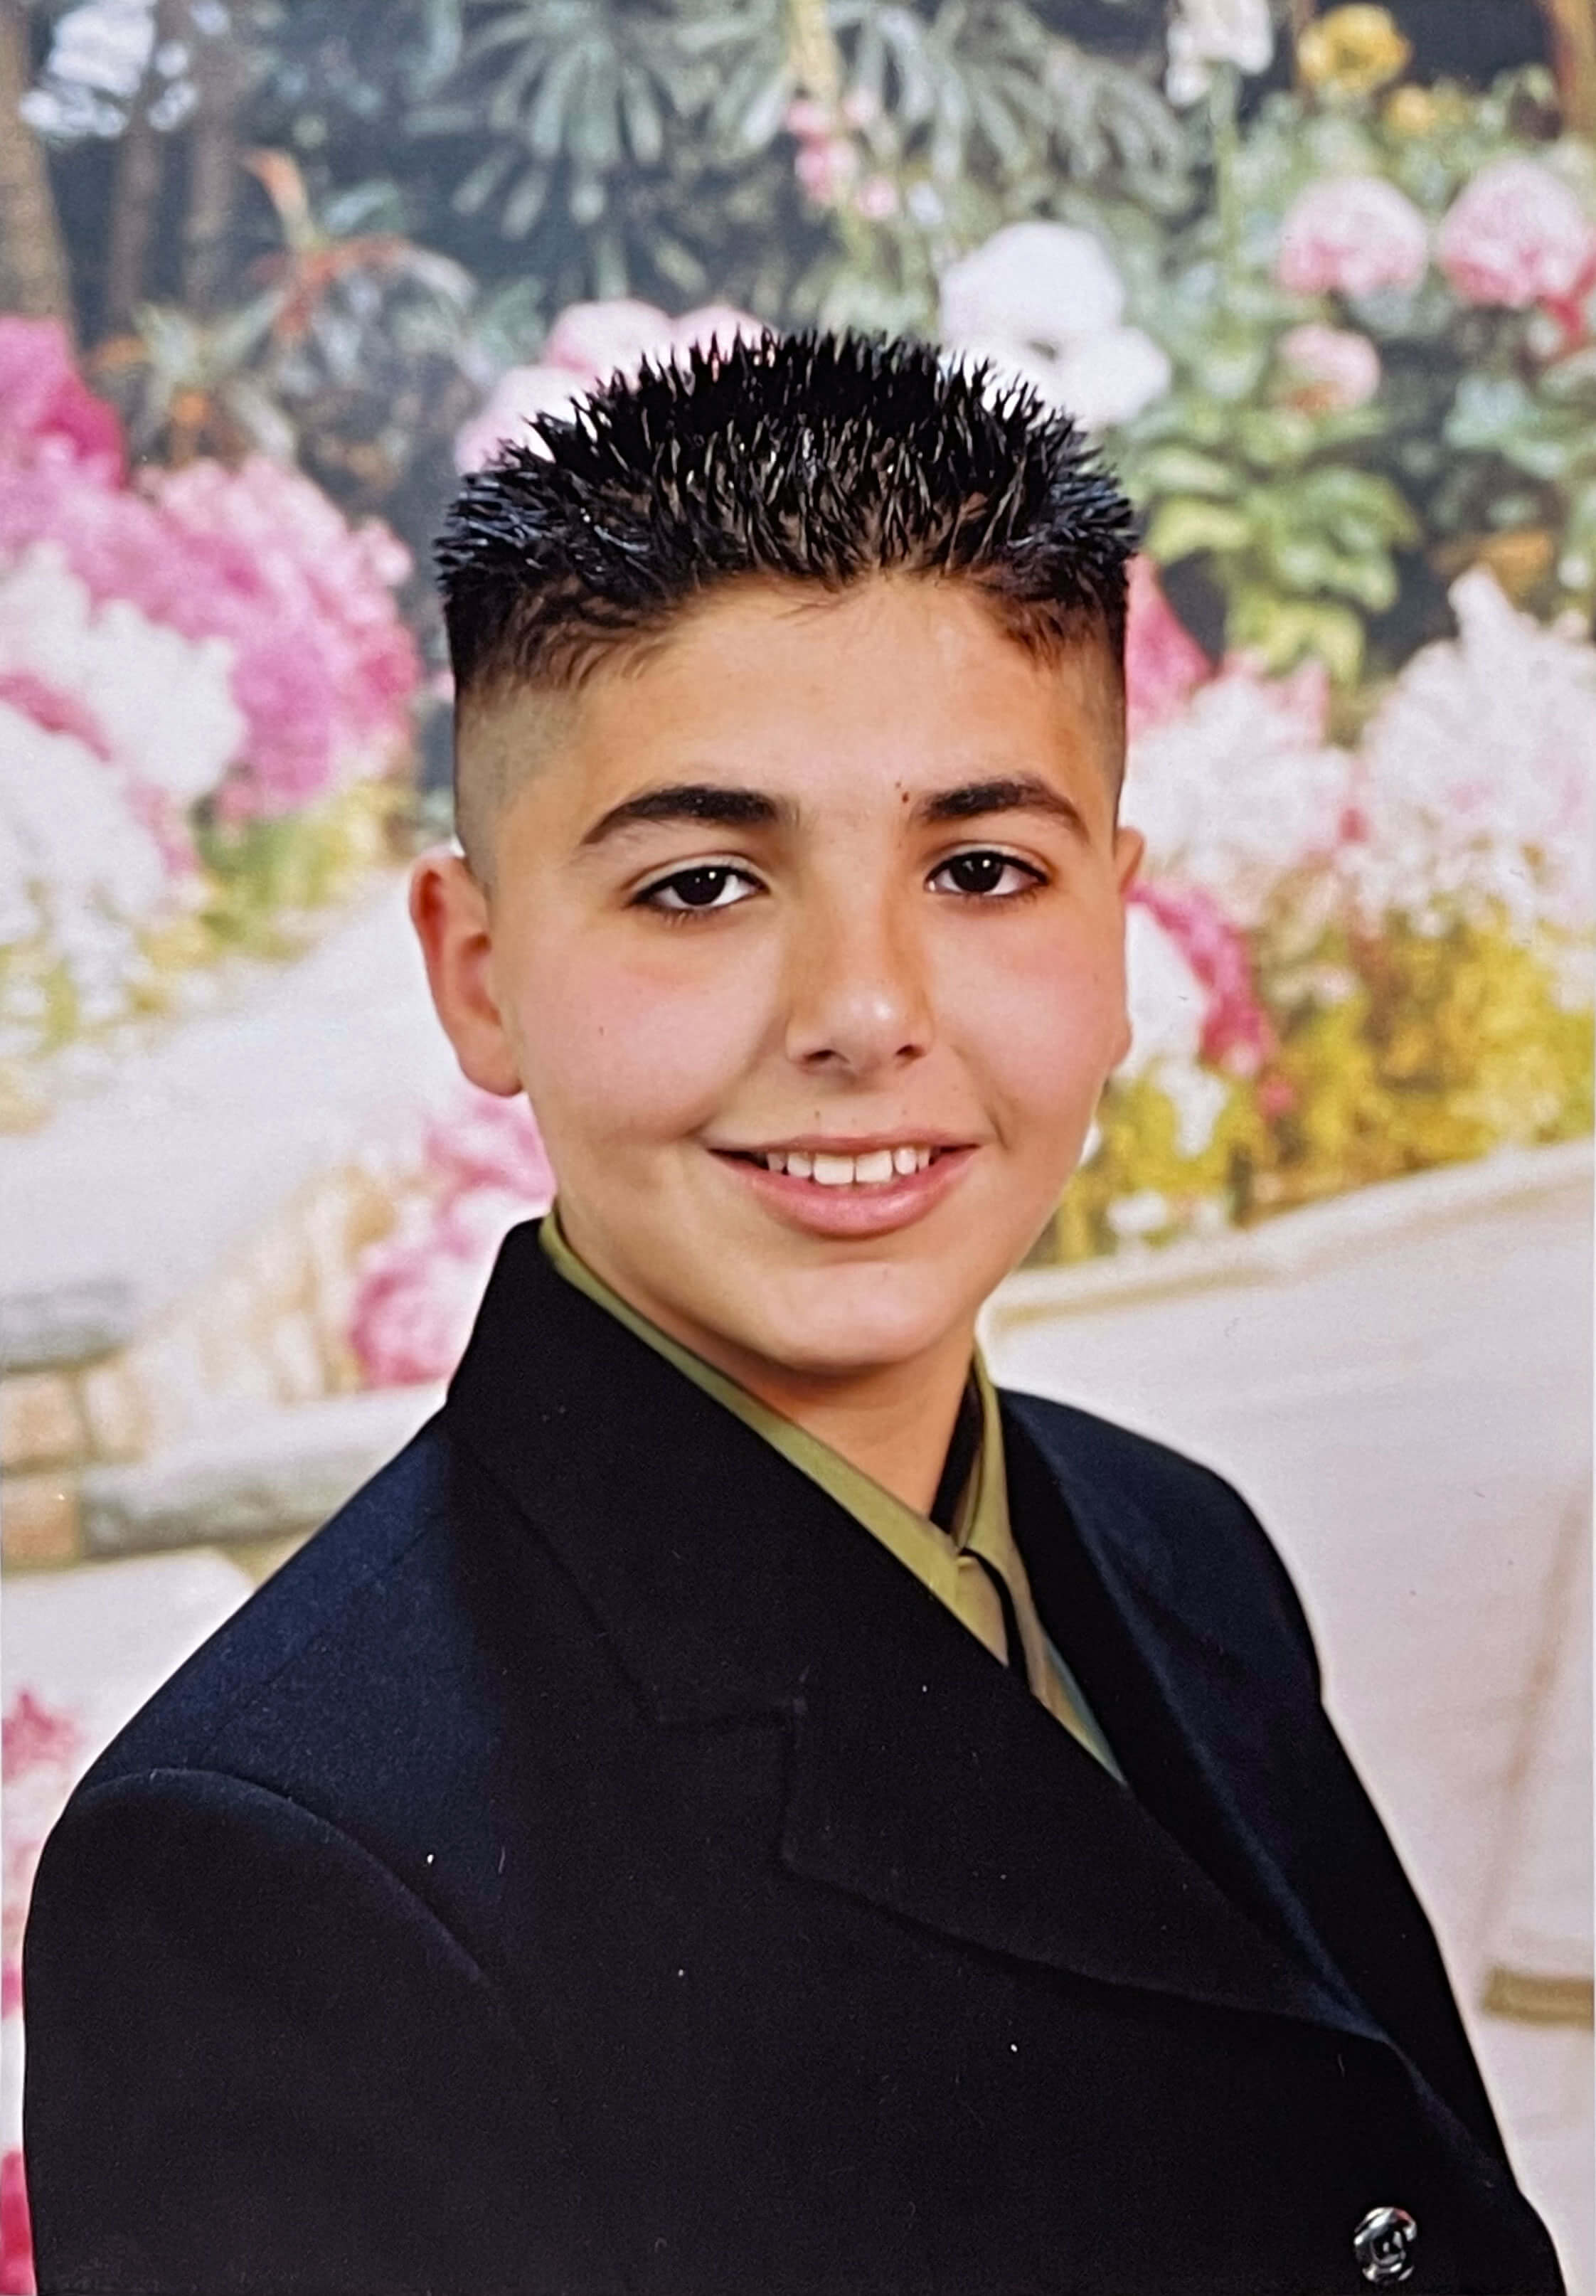 Young Boy From Torso Up Smiling and Wearing a Black Blazer in Front of a Floral Backdrop